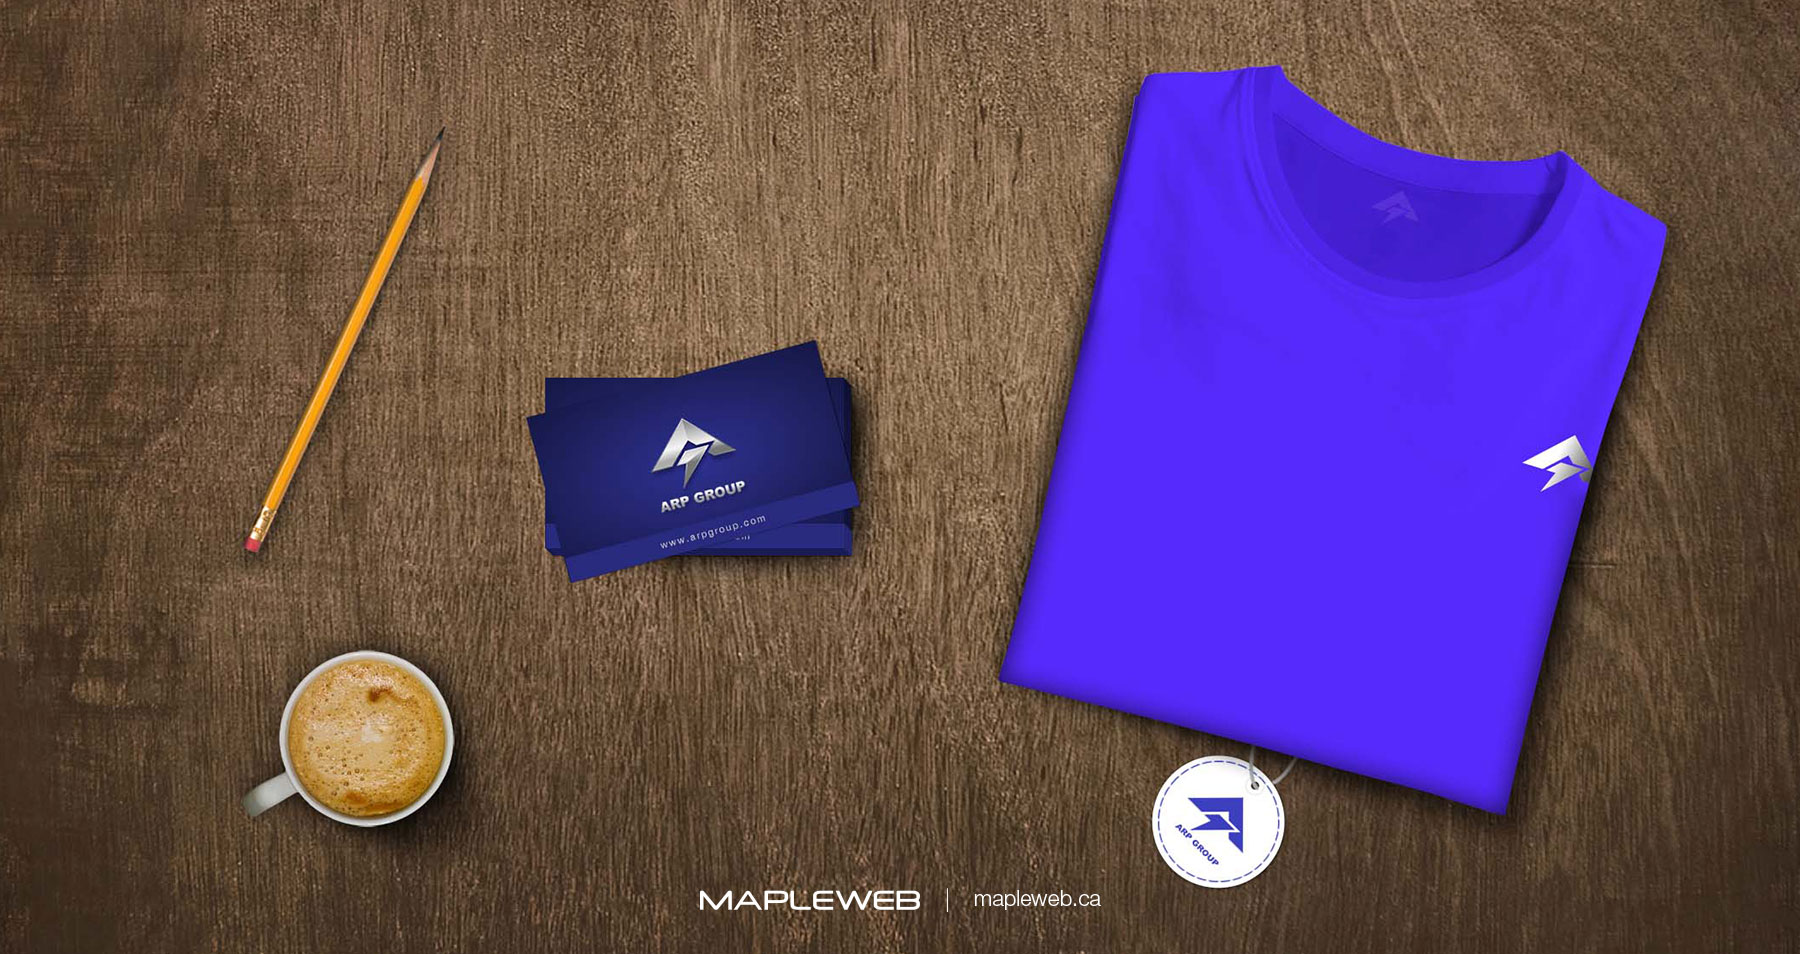 Arp Group Blue Tshirt Coffee Pencil and Business Card
Brand design by Mapleweb
